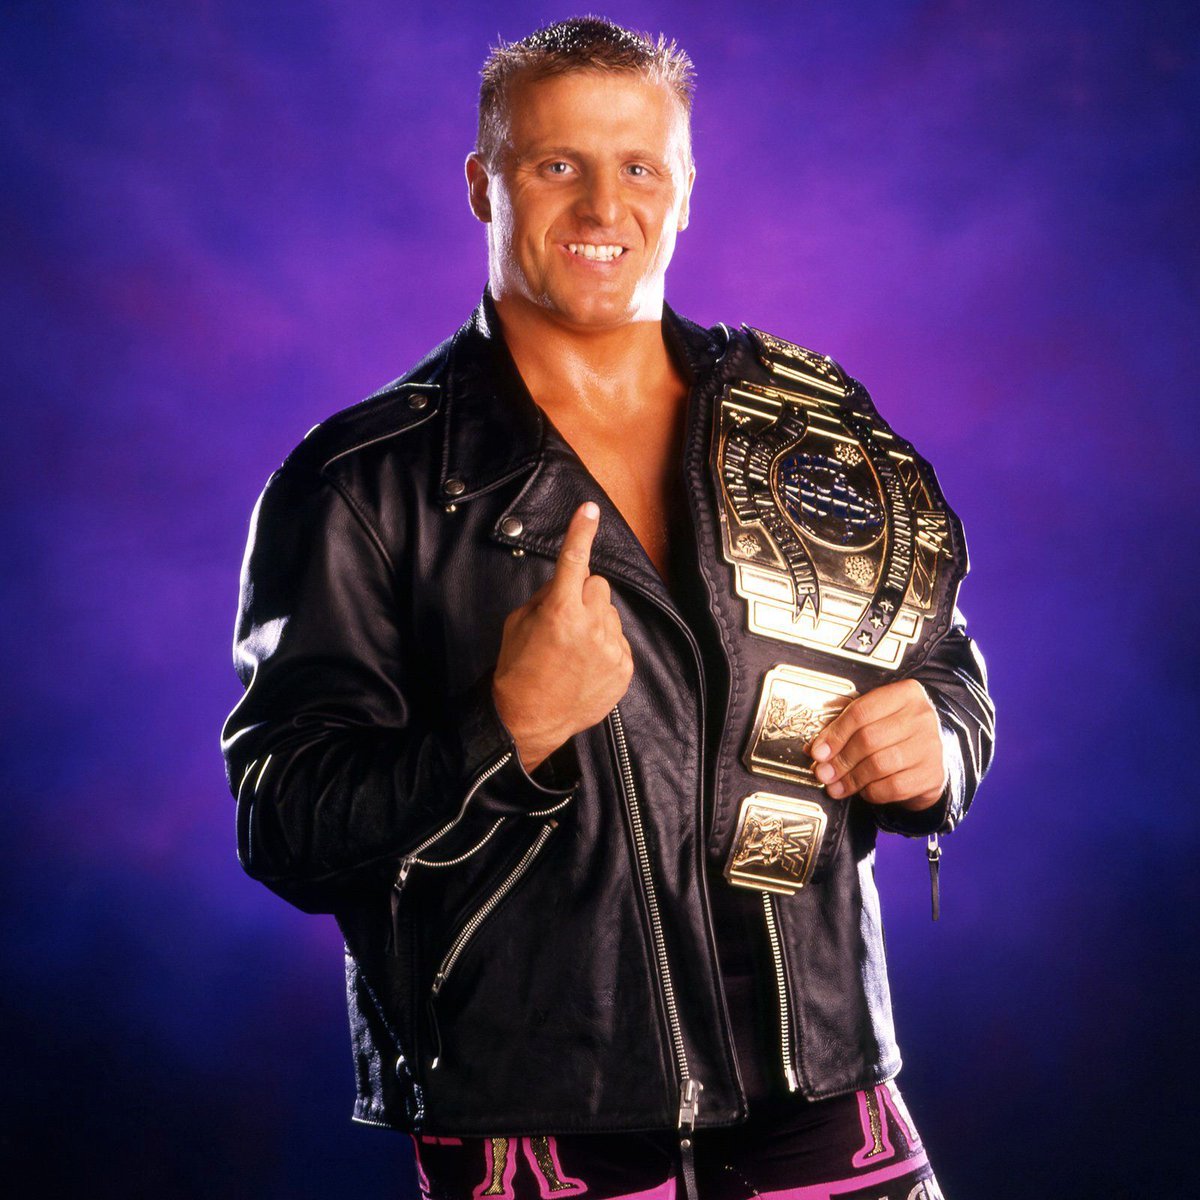 Intercontinental Champion of the day: Owen Hart - Claimed the Intercontinental championship on April 28, 1997. His title run lasted 97 days. 🏆 #WWF #WWE #Wrestling #OwenHart